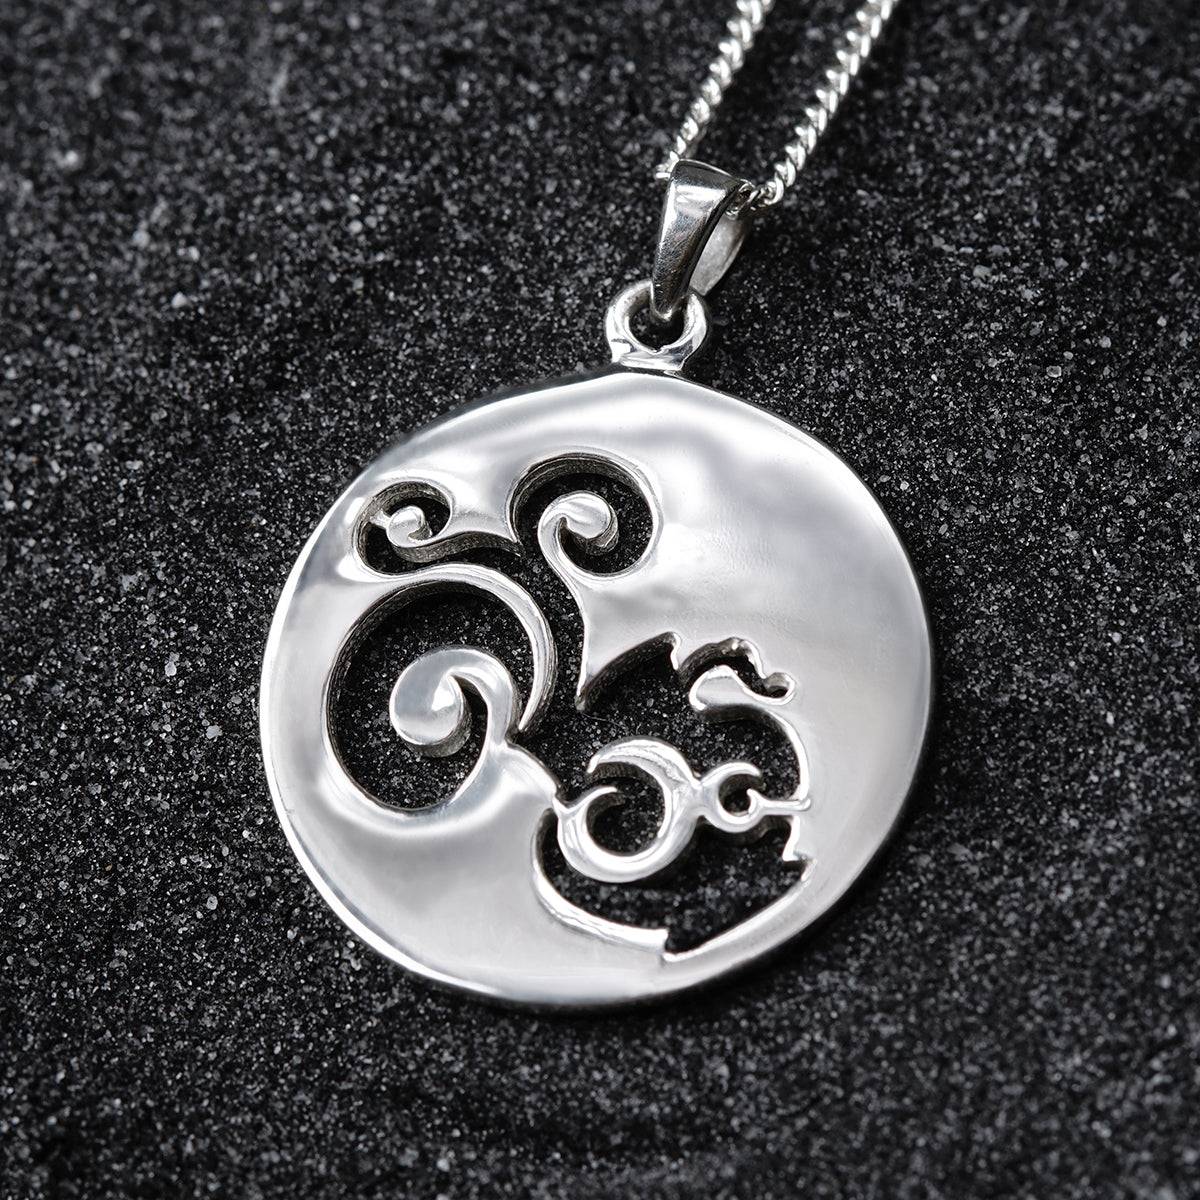 a silver pendant with an omen symbol on it